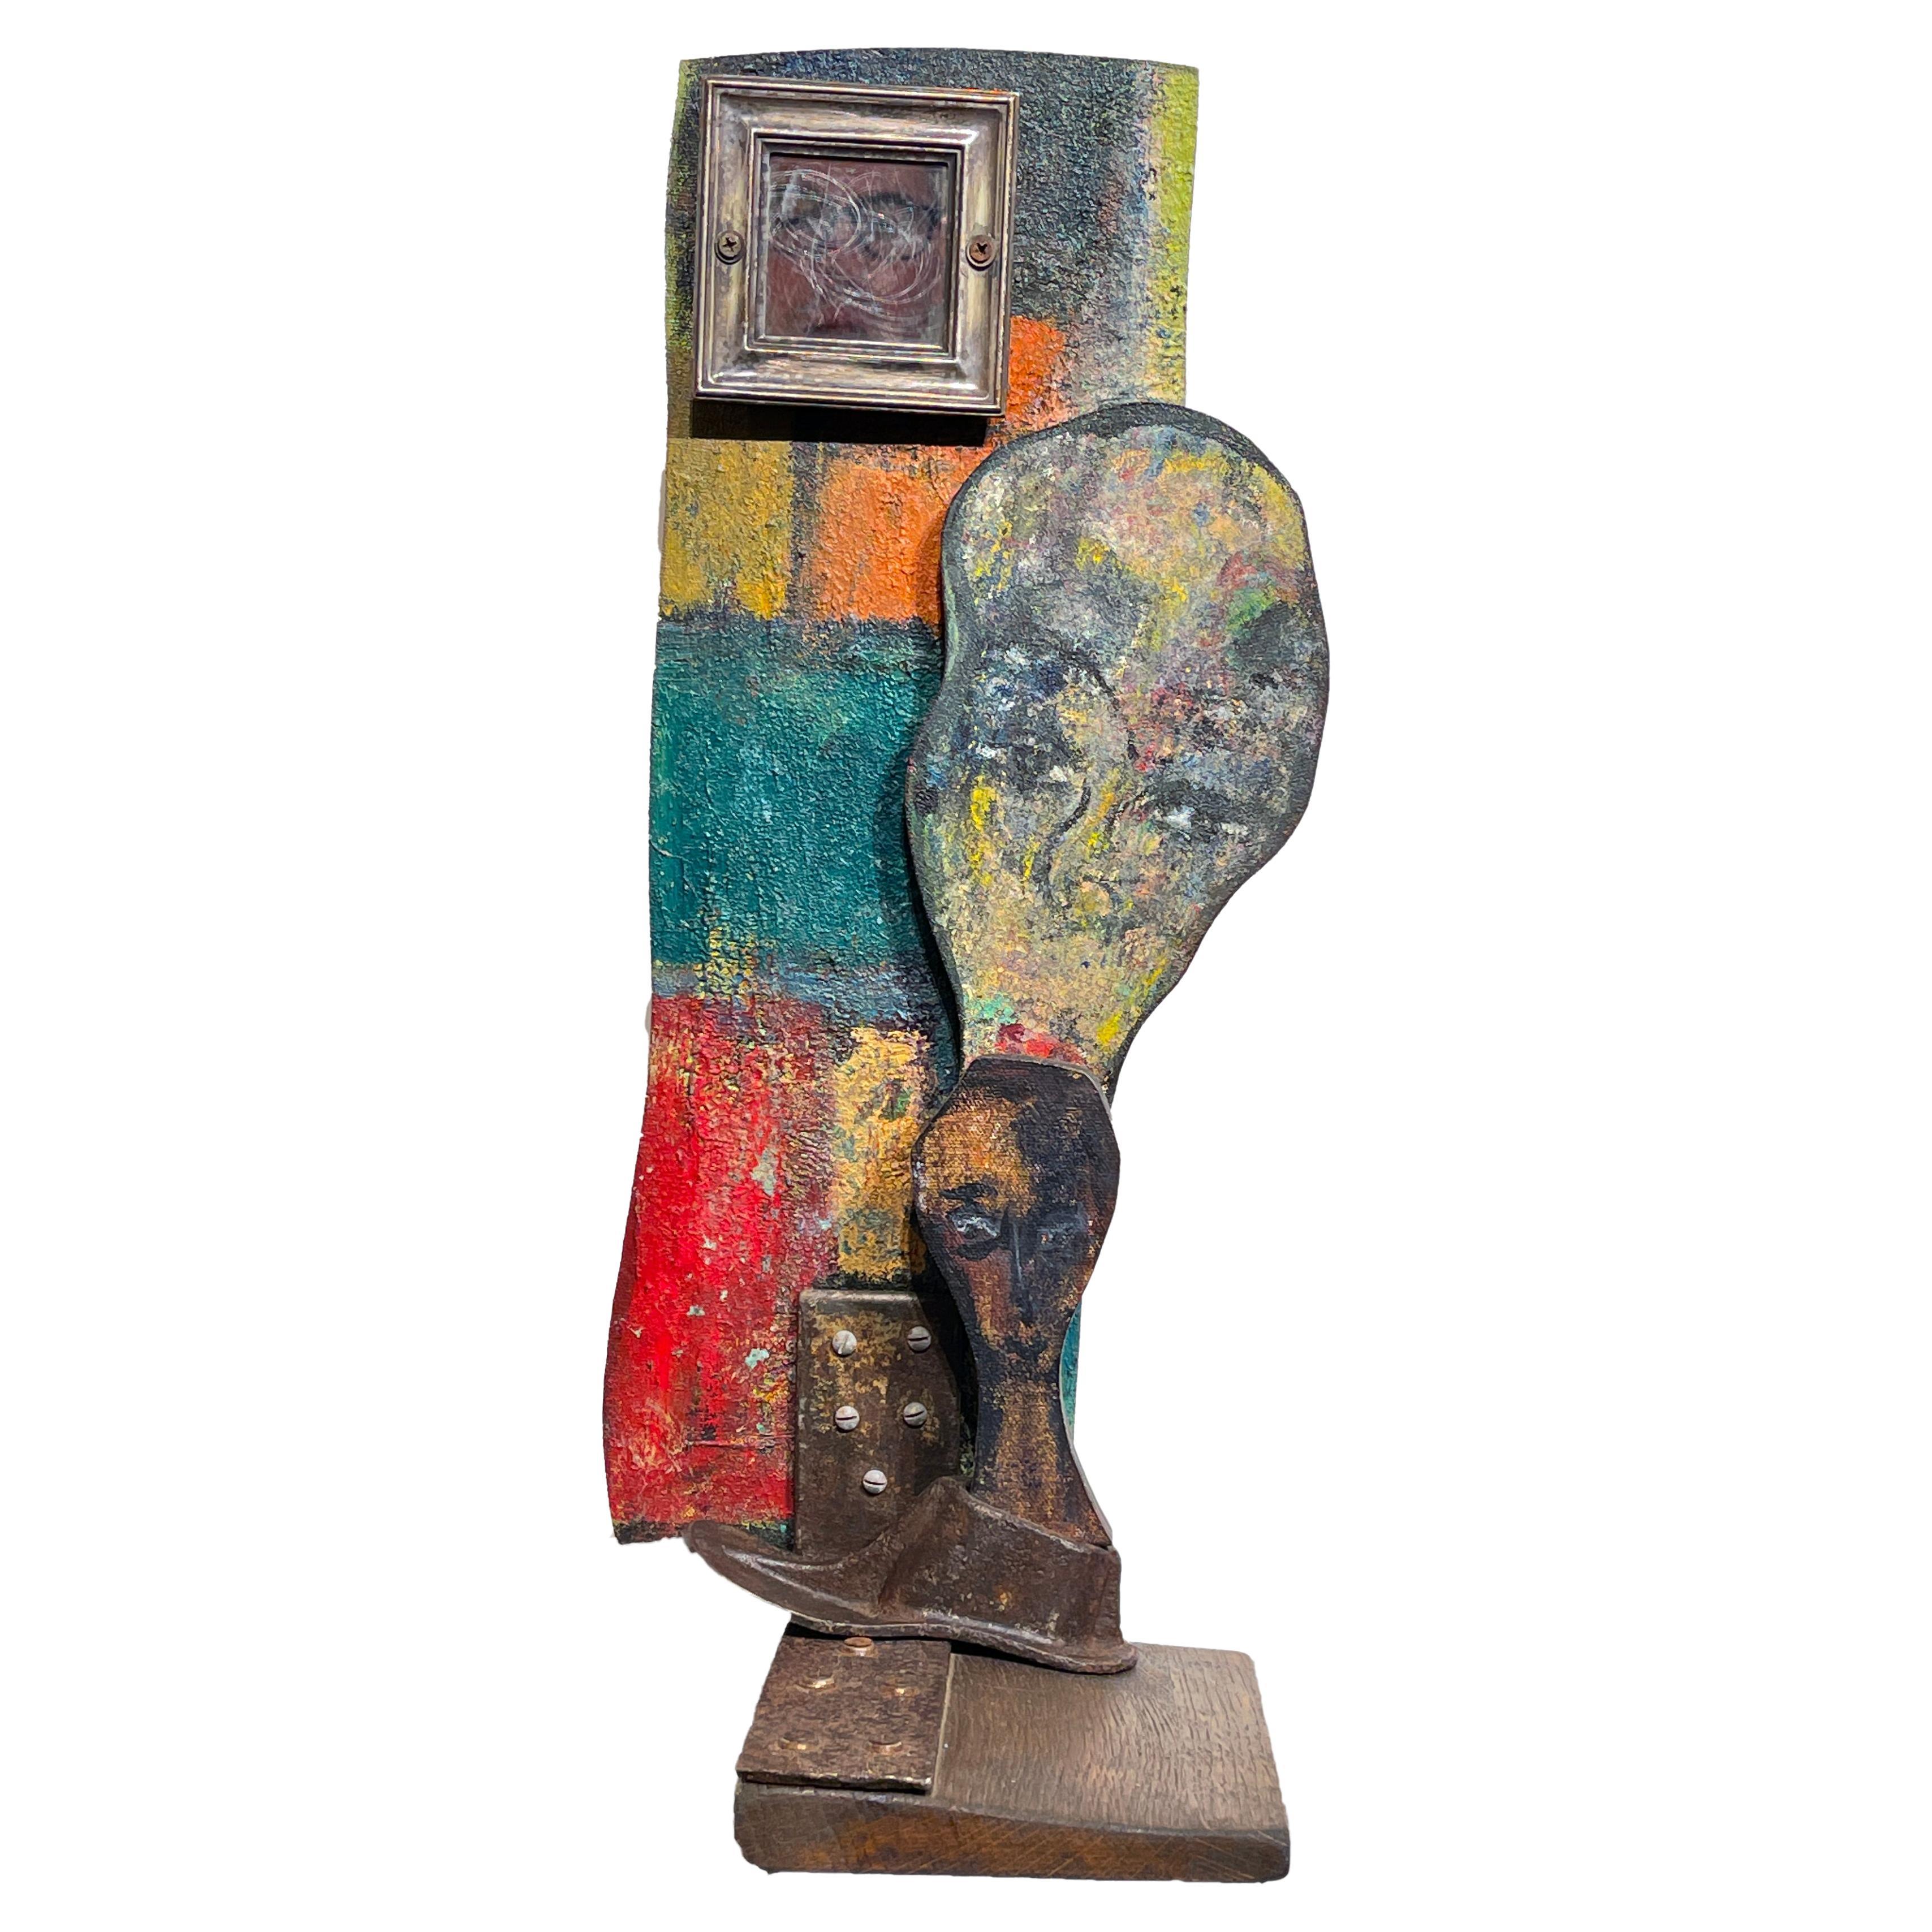 Vanity Mirror Sculptural Construction w/ Paintings and Found Objects